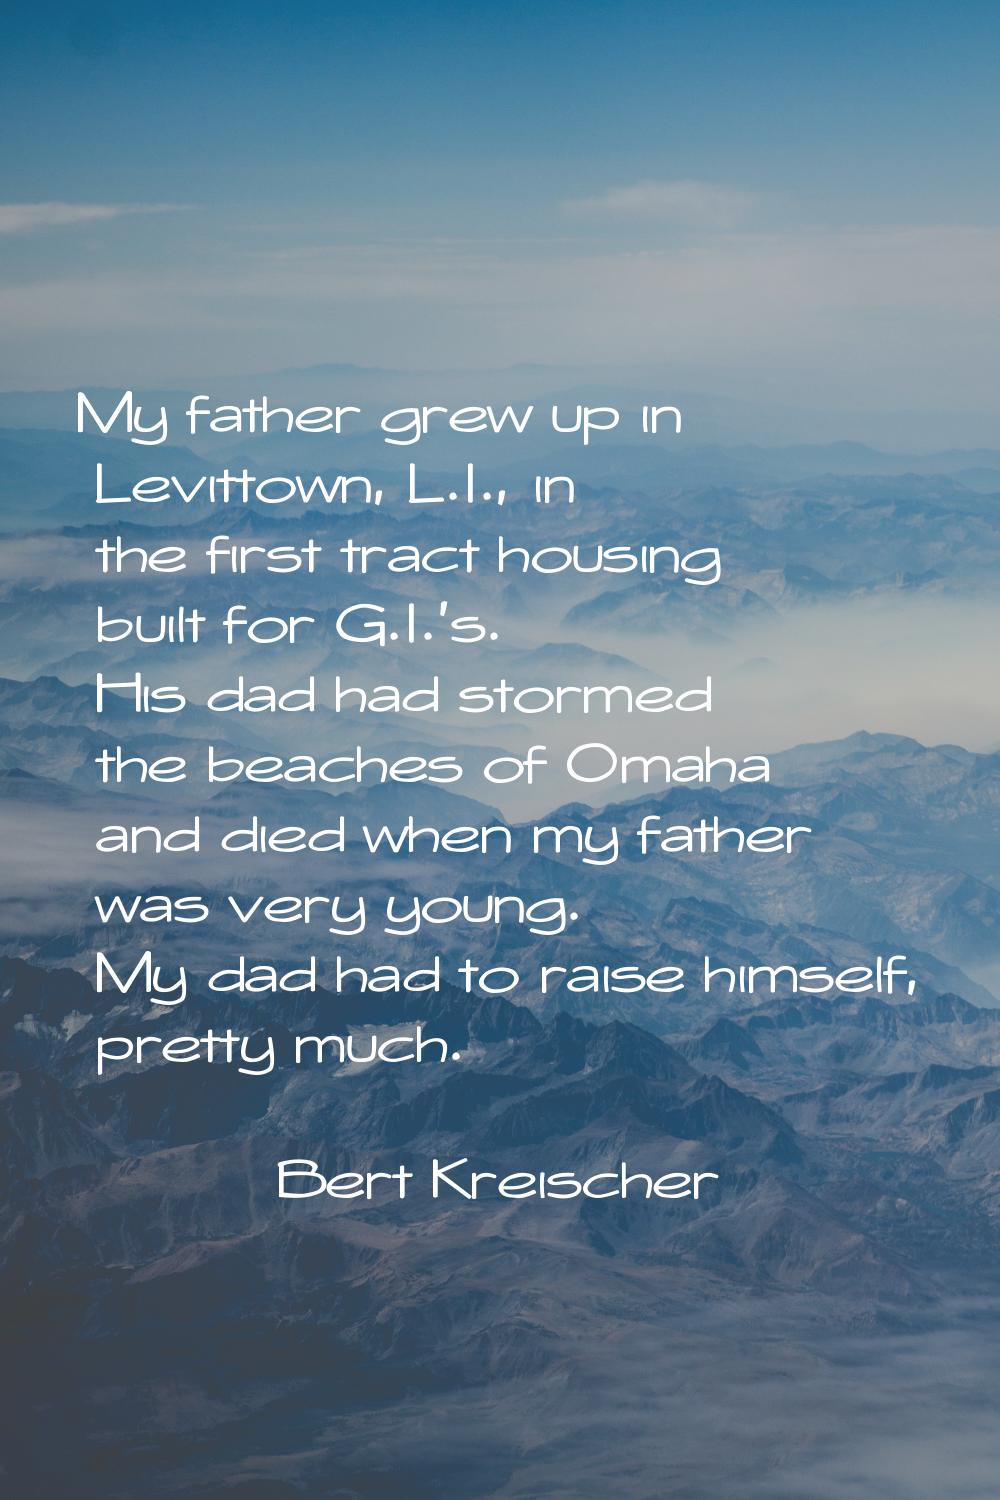 My father grew up in Levittown, L.I., in the first tract housing built for G.I.'s. His dad had stor